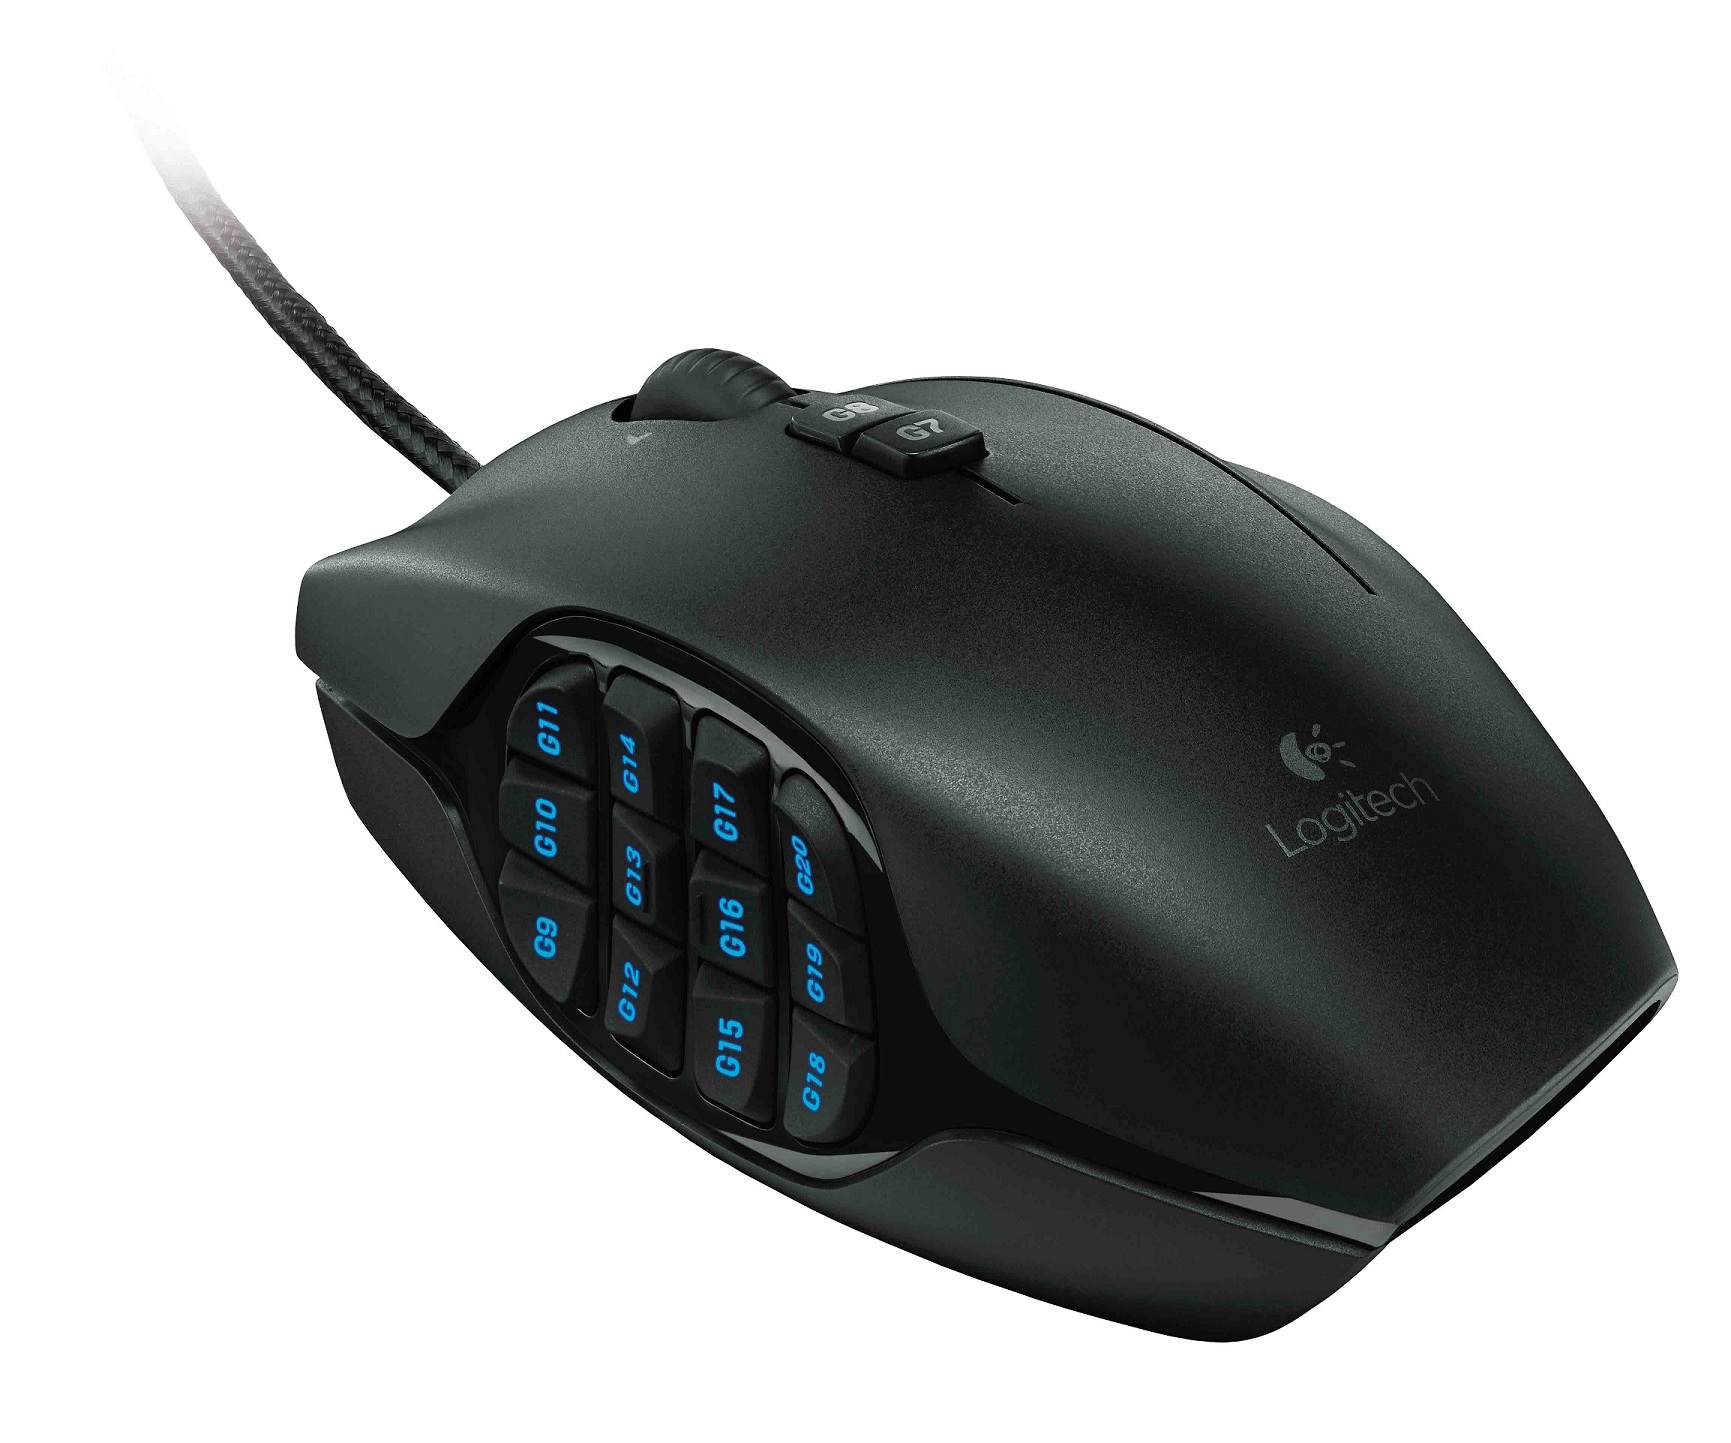 Logitech Unveils the G600 MMO Gaming Mouse